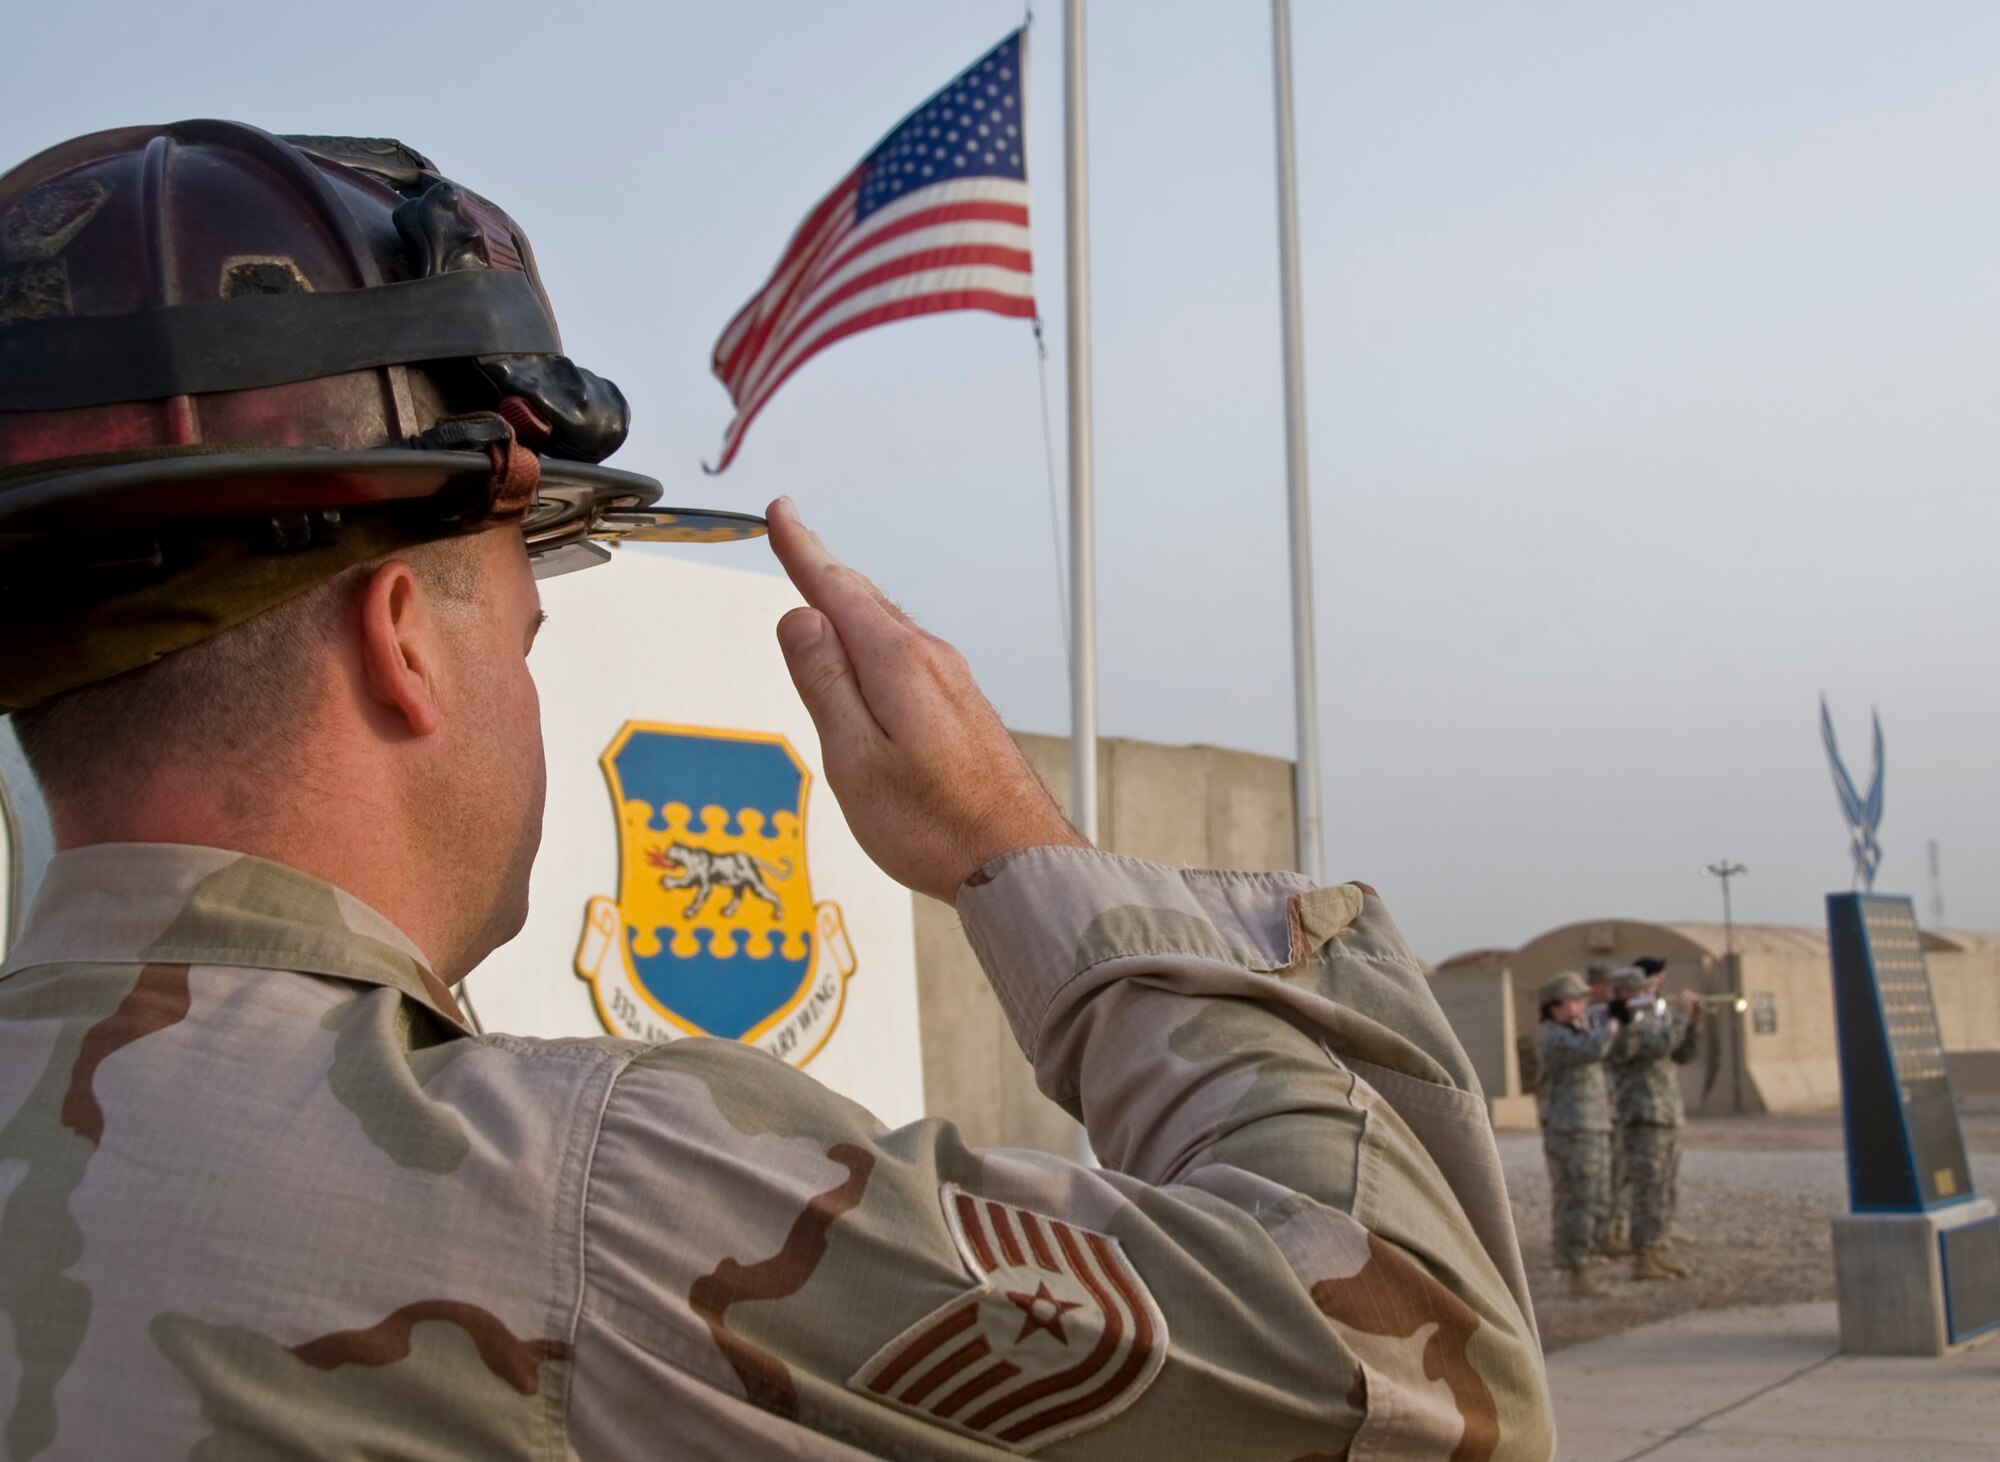 ALI BASE, Iraq -- Tech. Sgt. Michael Routh, 407th Expeditionary Civil Engineer Squadron fire fighter, salutes the United States of America's flag during a 9/11 remembrance ceremony Sept. 11, 2008. The 407th Air Expeditionary Group here held a remembrance ceremony following reveille, honoring those who had lost their lives back on this day in 2001. (U.S. Air Force photo/Airman 1st Class Christopher Griffin)